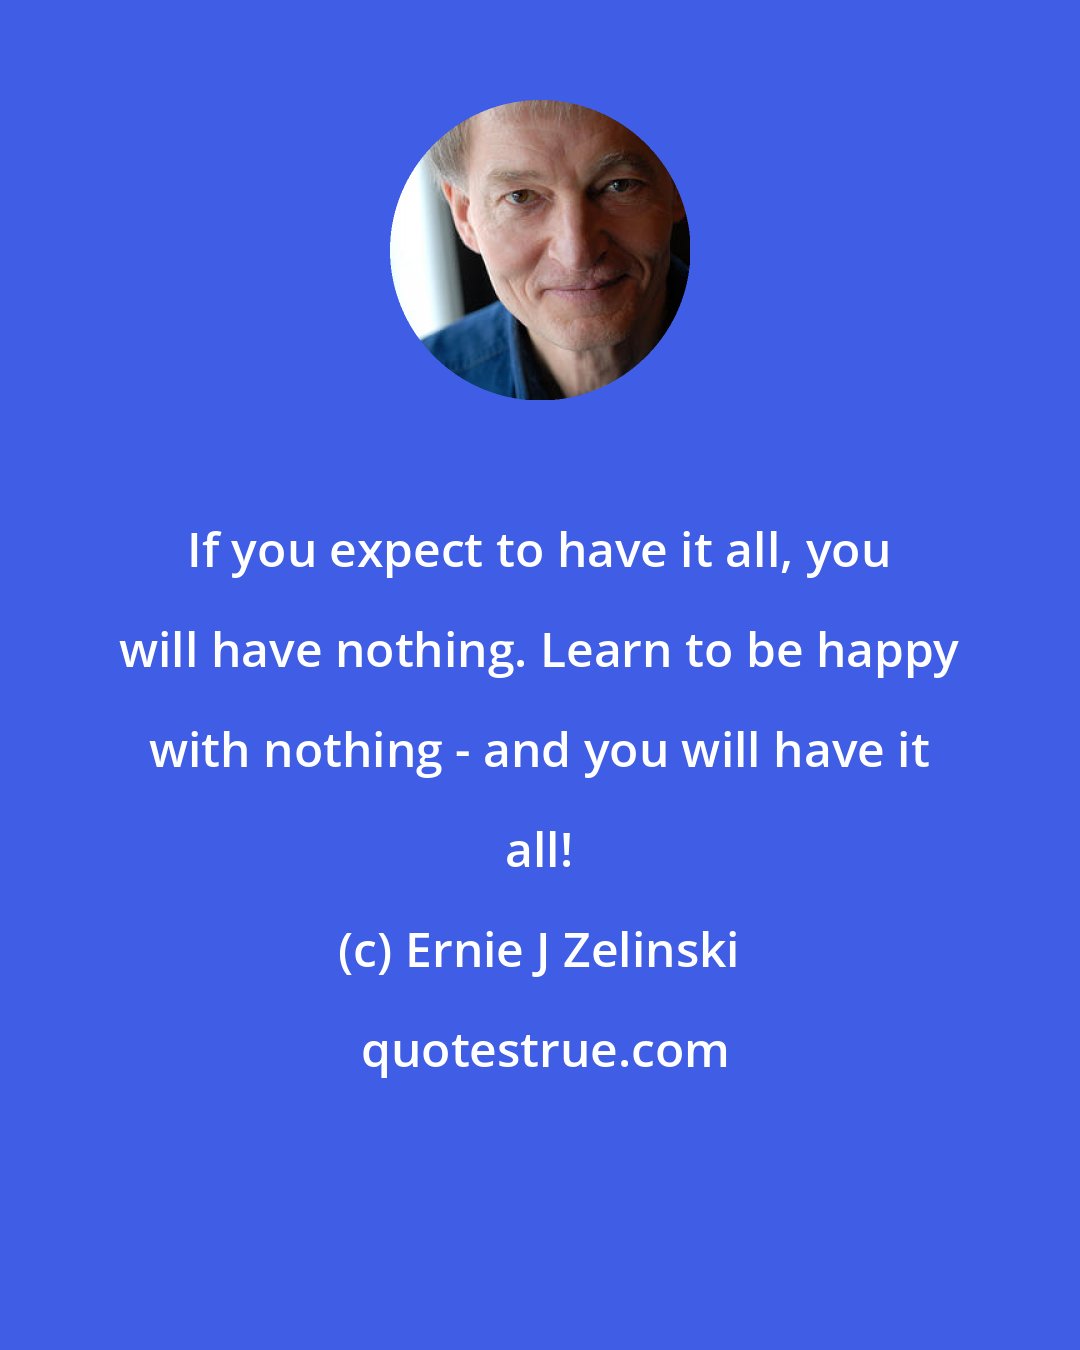 Ernie J Zelinski: If you expect to have it all, you will have nothing. Learn to be happy with nothing - and you will have it all!